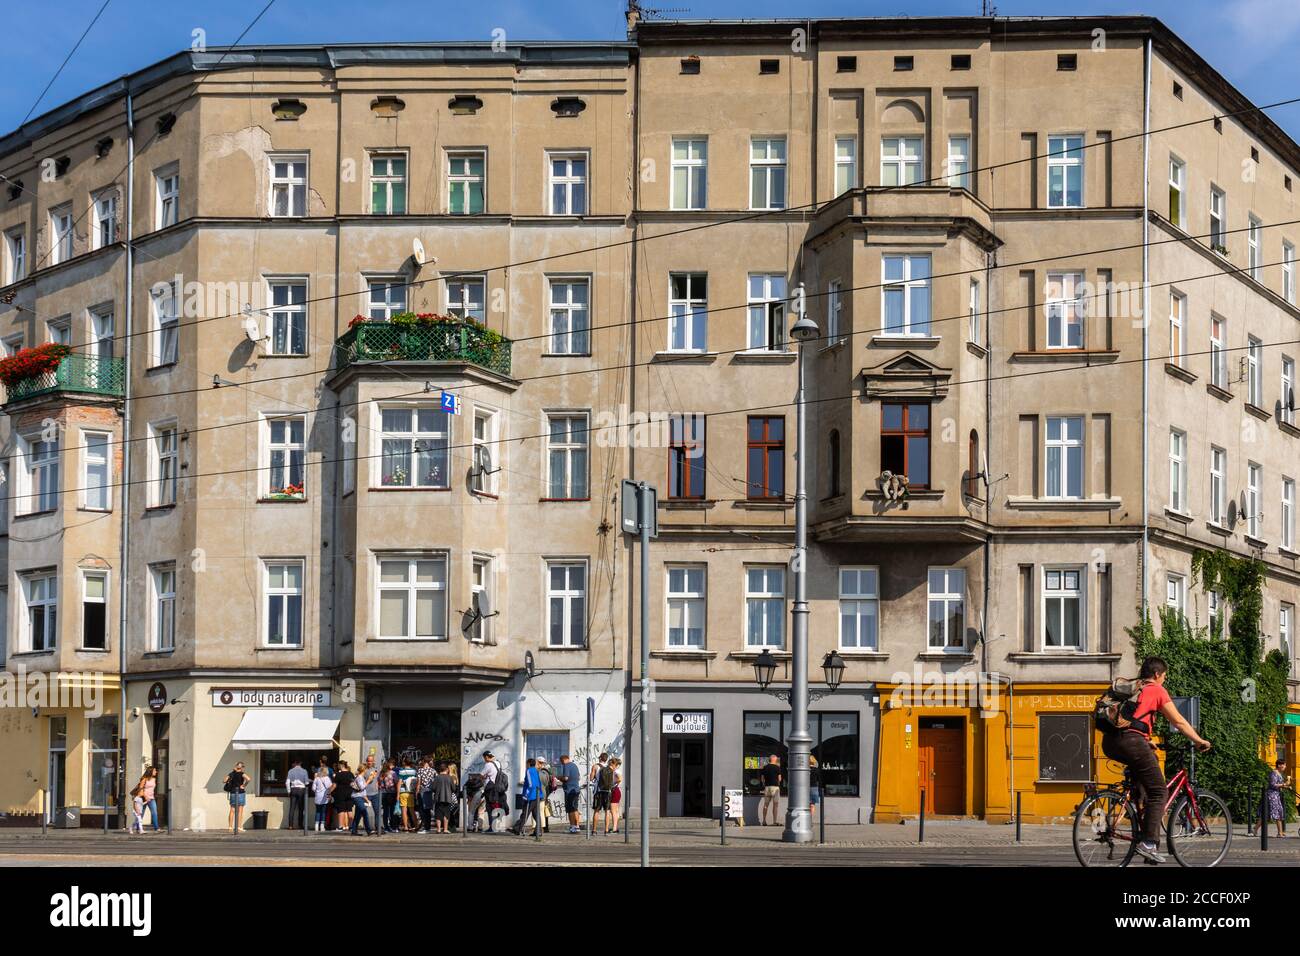 Facade of a building in Wroclaw busy street scene during summer 2017, Silesia, Poland, Europe Stock Photo